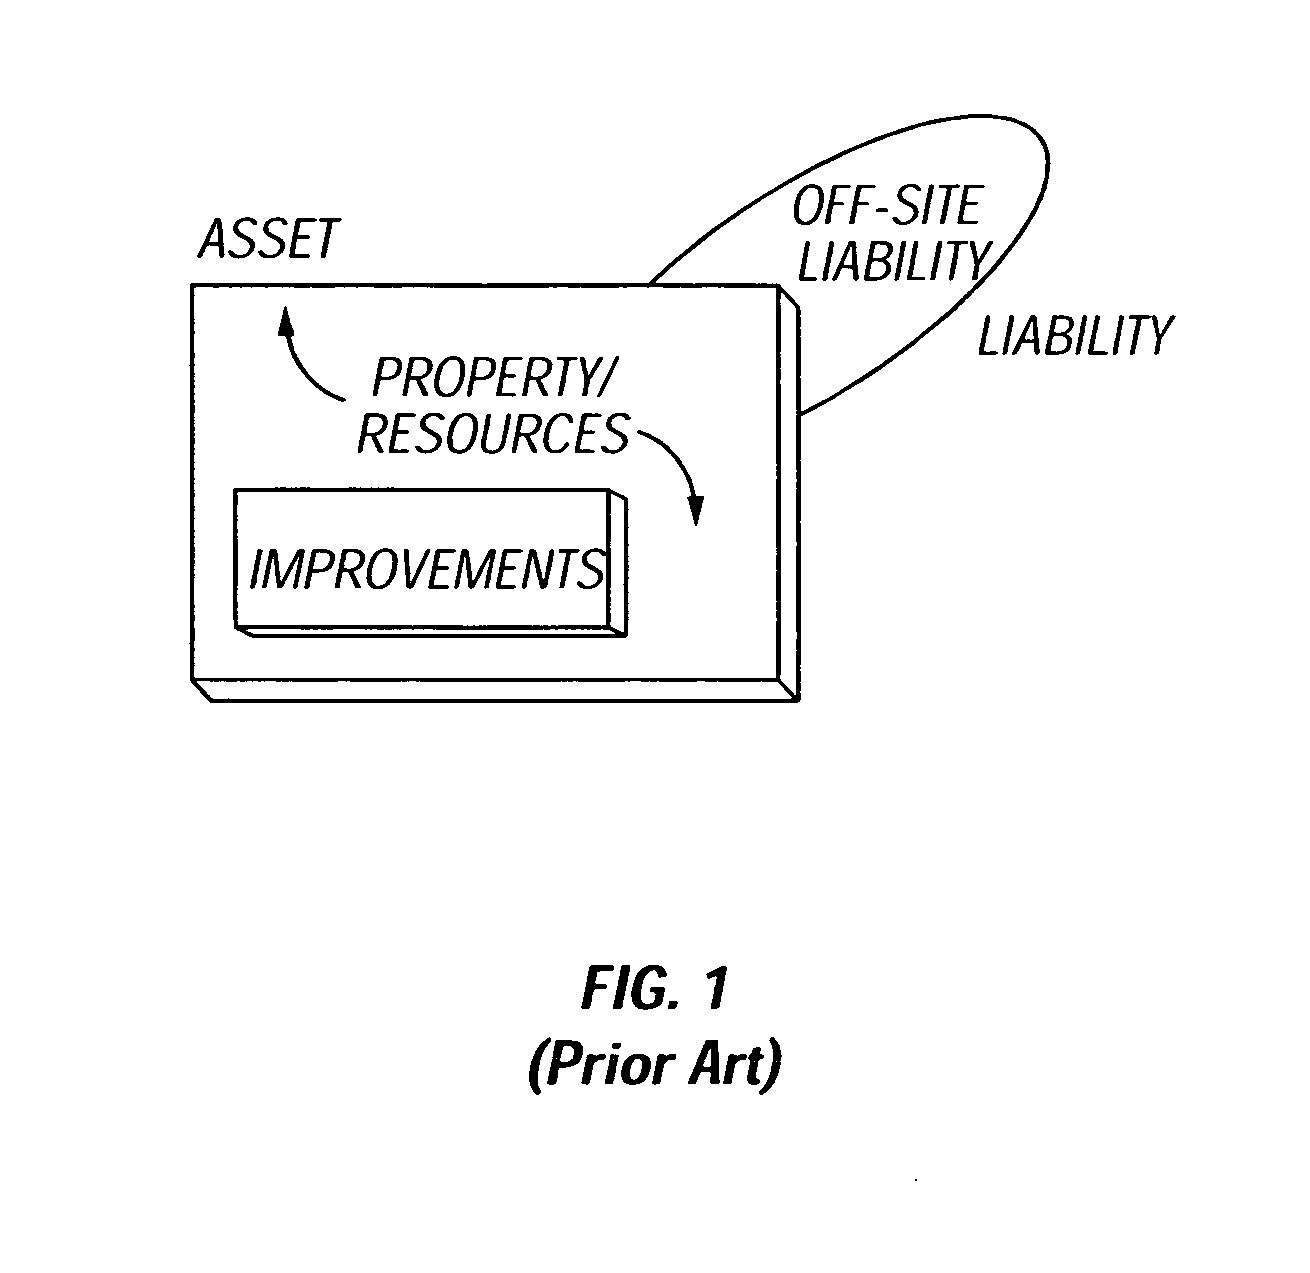 Method and apparatus for monitoring and responding to land use activities